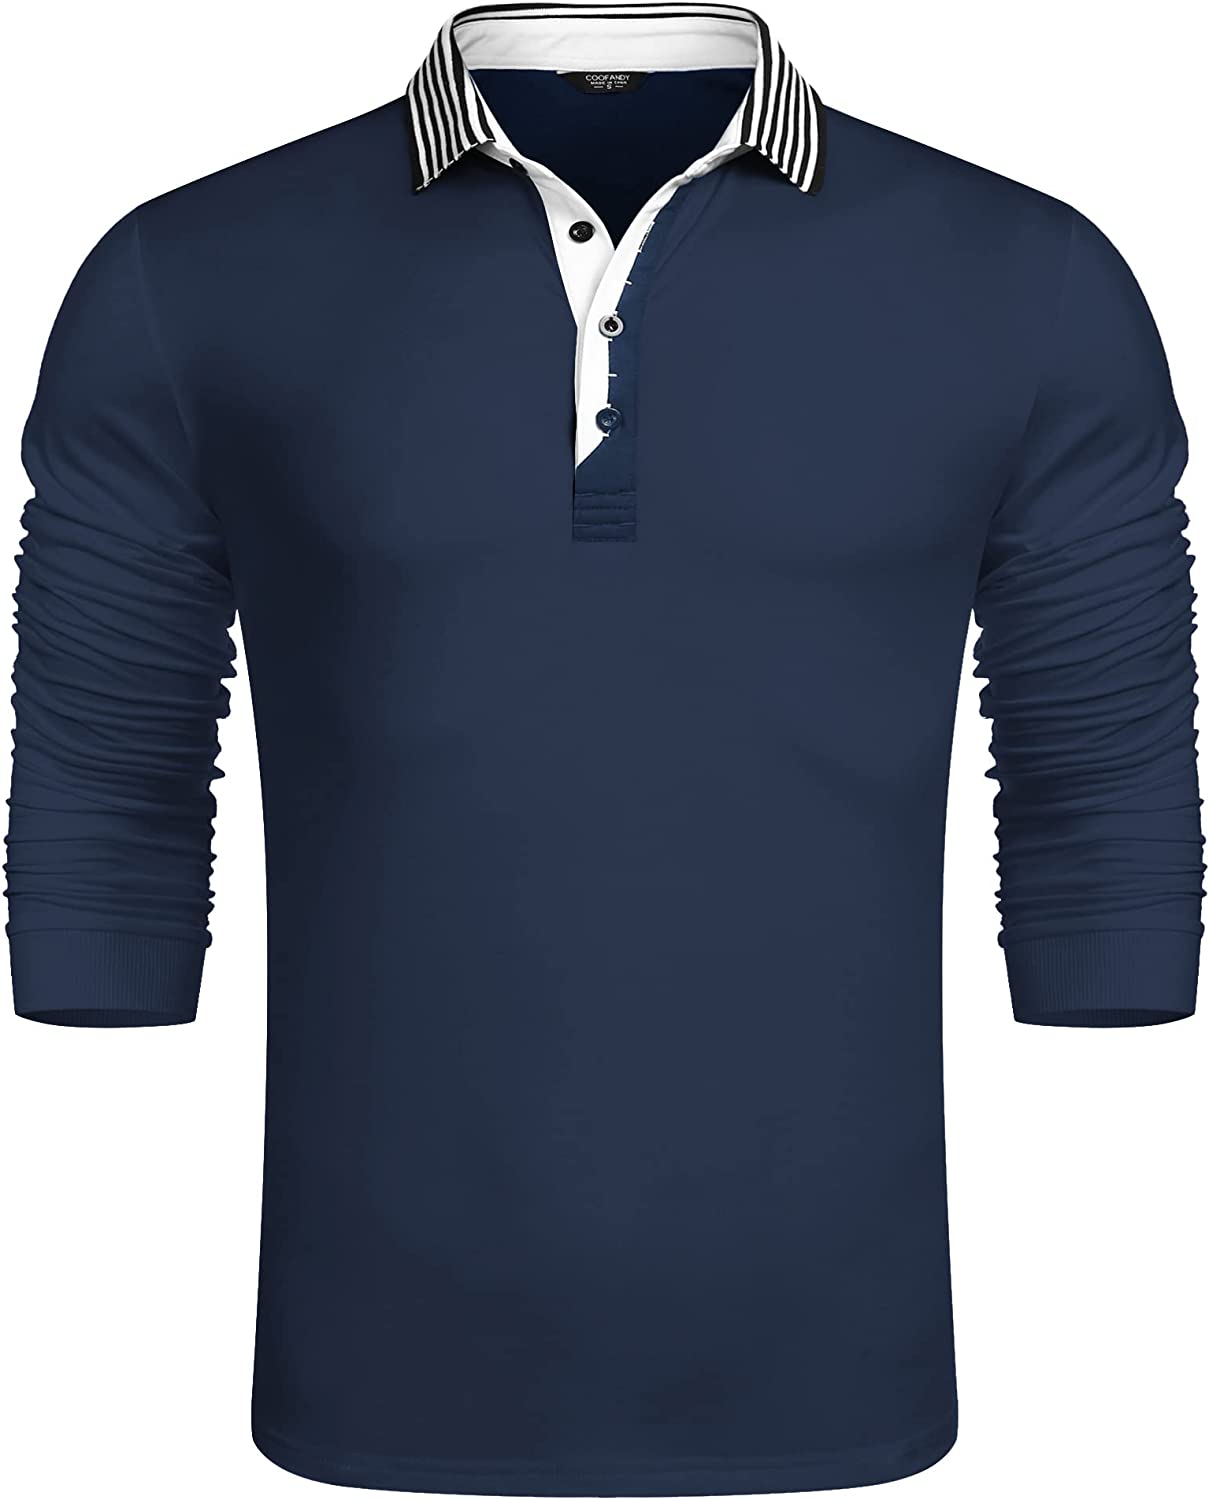 COOFANDY Men's Long Sleeve Polo Shirt Striped Collar Casual Slim Fit Cotton  Polo